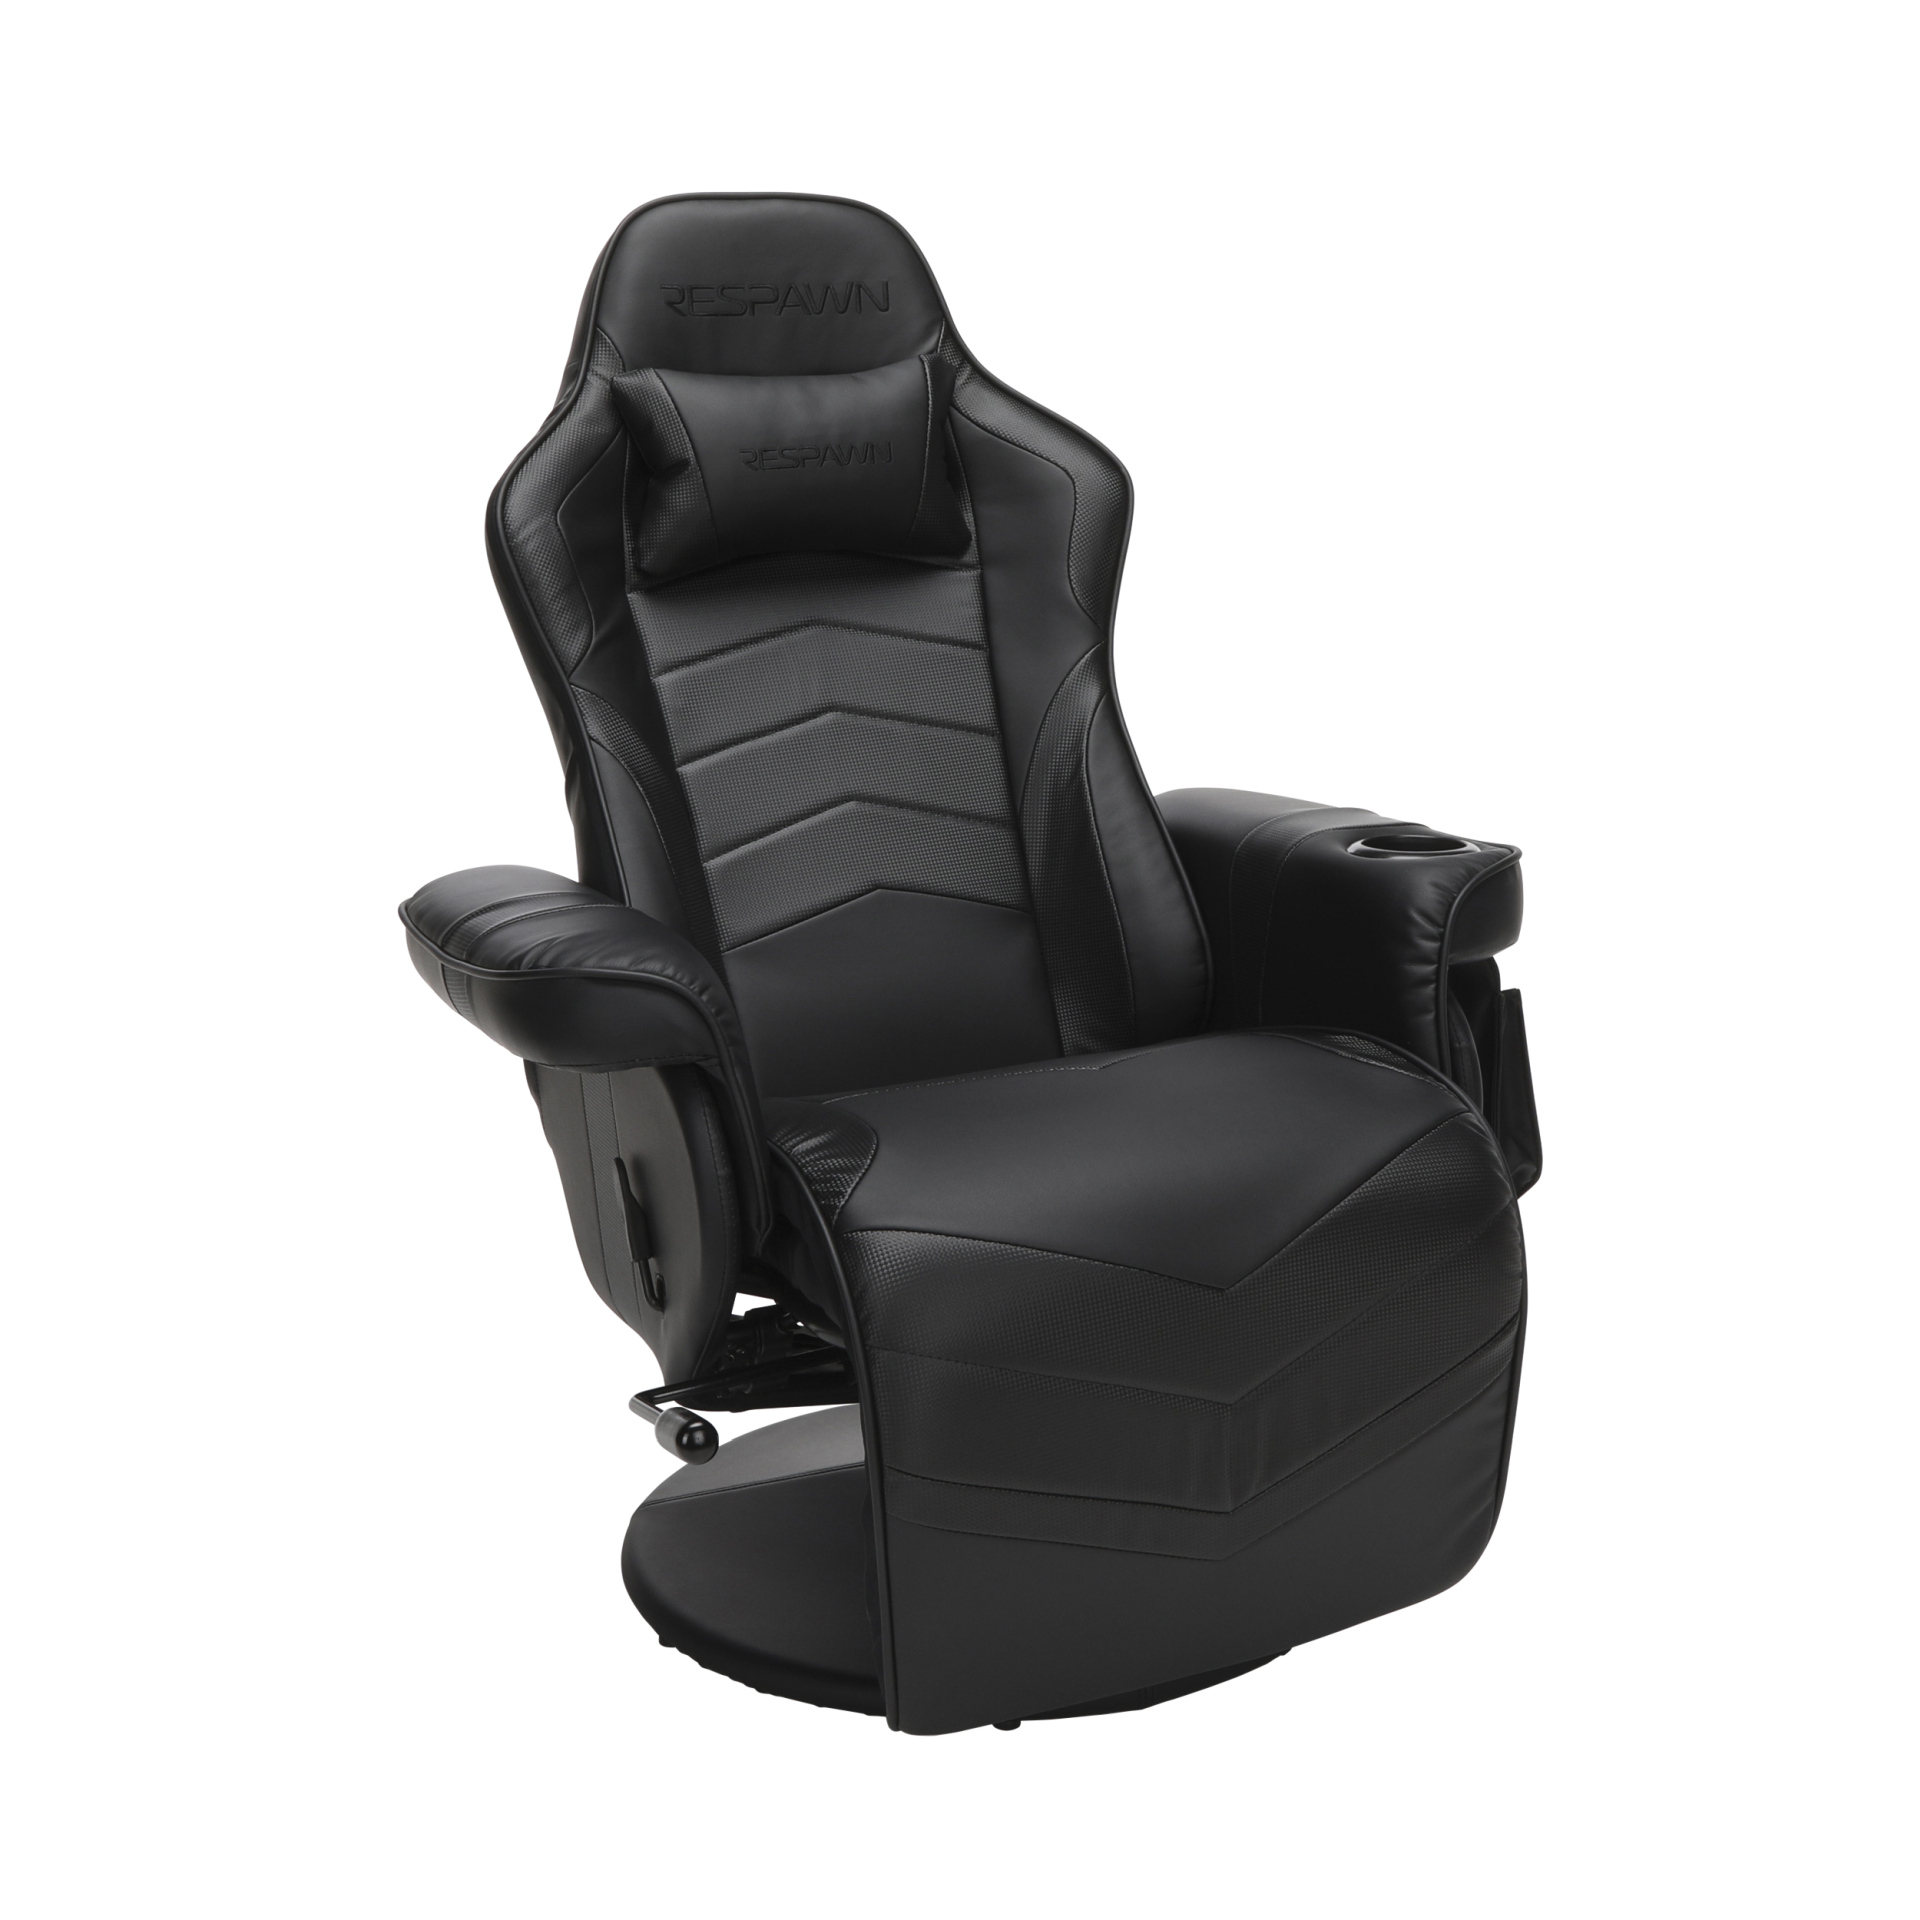 RESPAWN RSP-900 Gaming Recliner #1